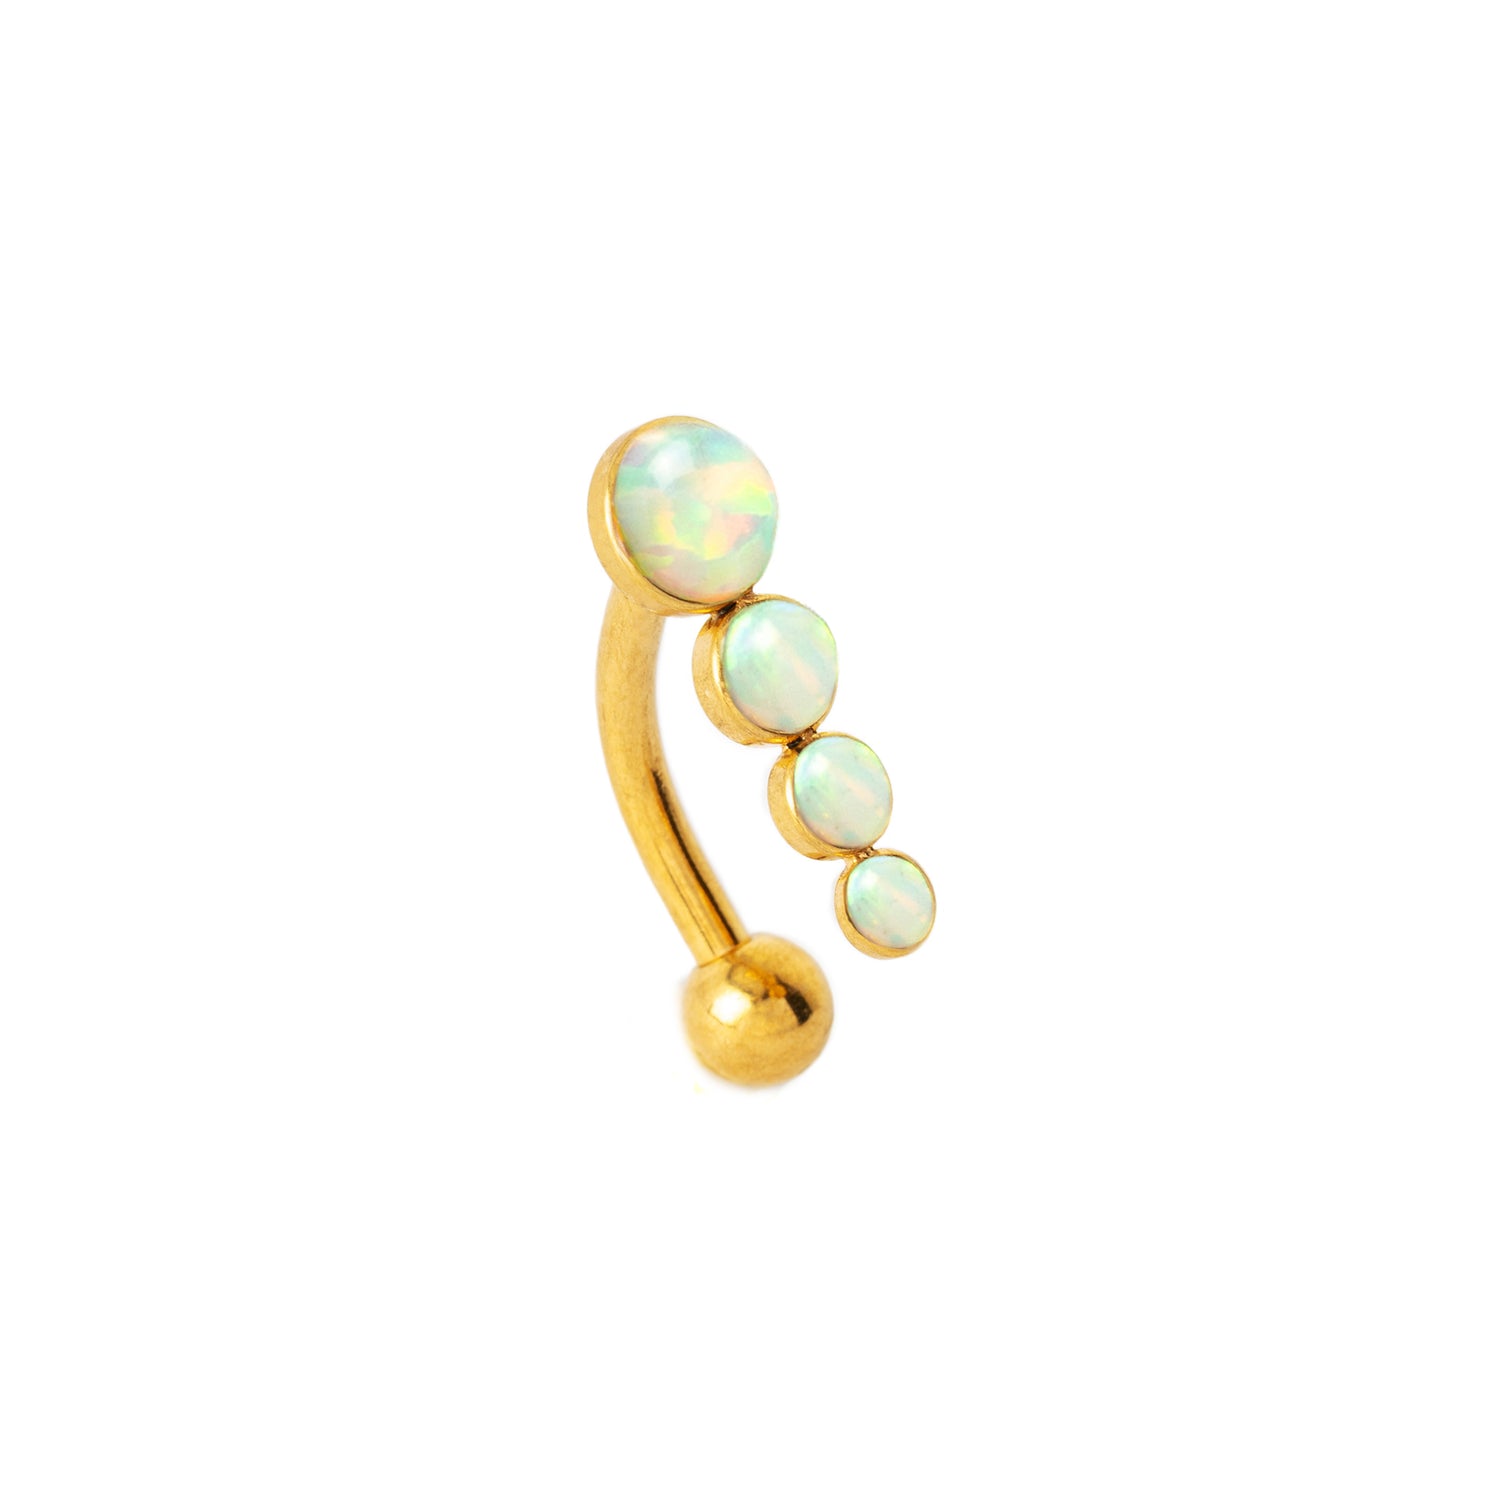 Newton golden surgical steel navel piercing with White Opal left side view